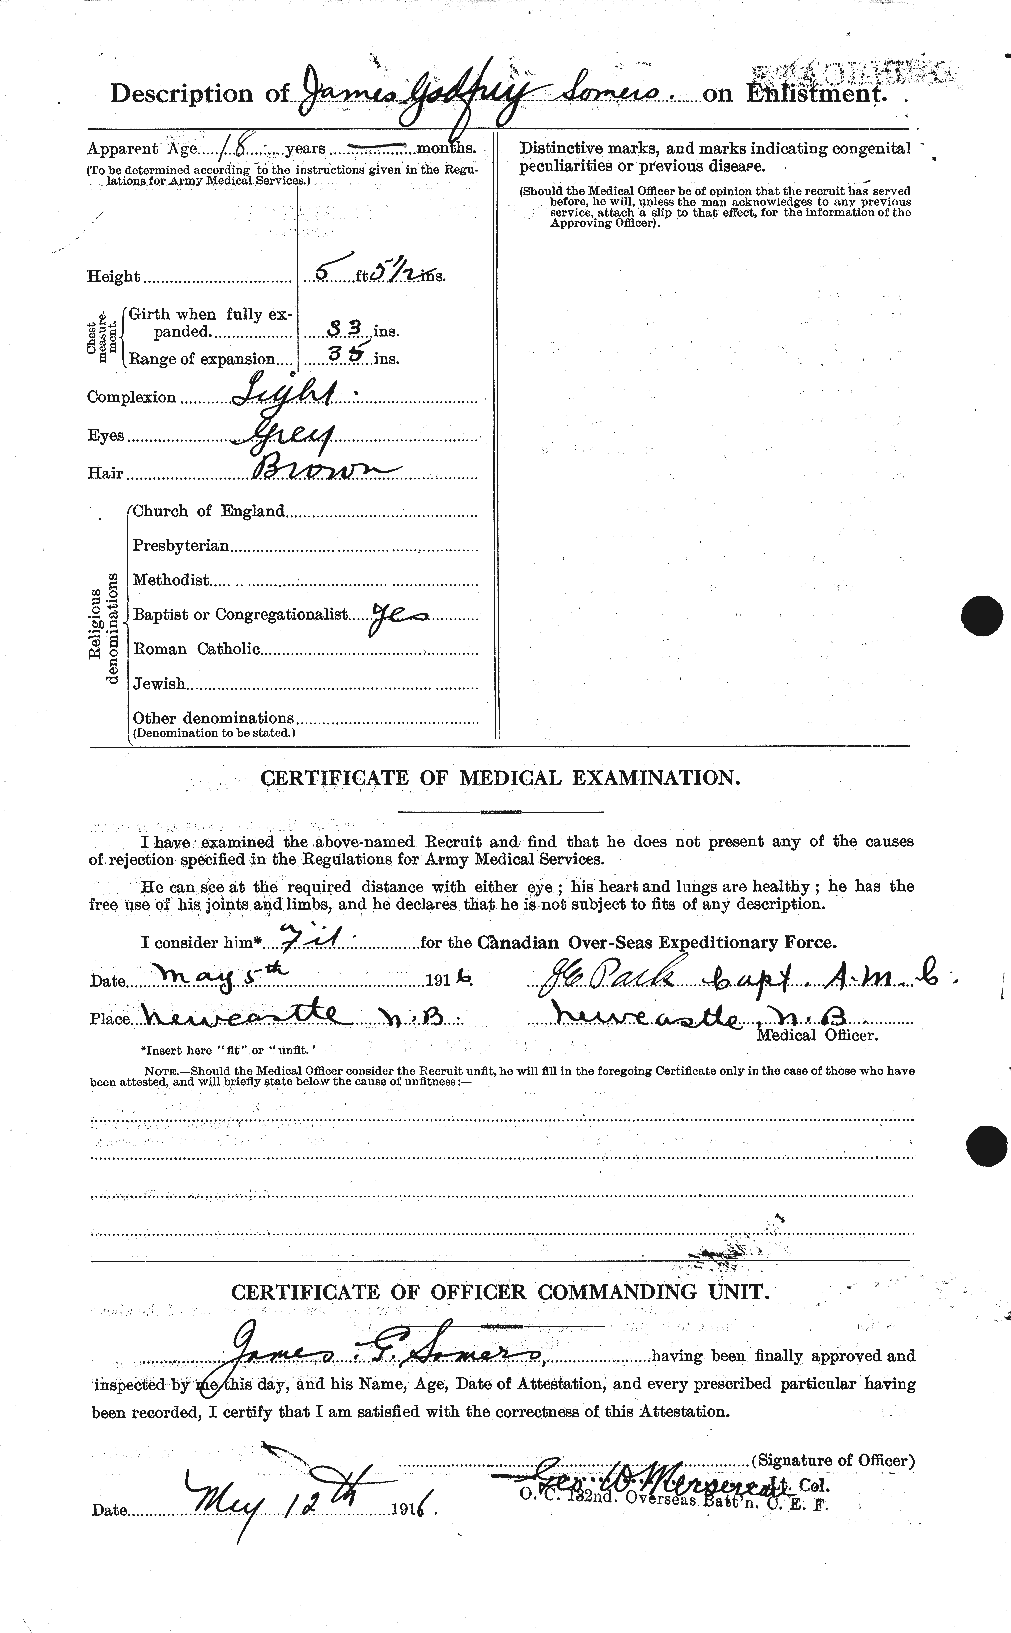 Personnel Records of the First World War - CEF 107147b